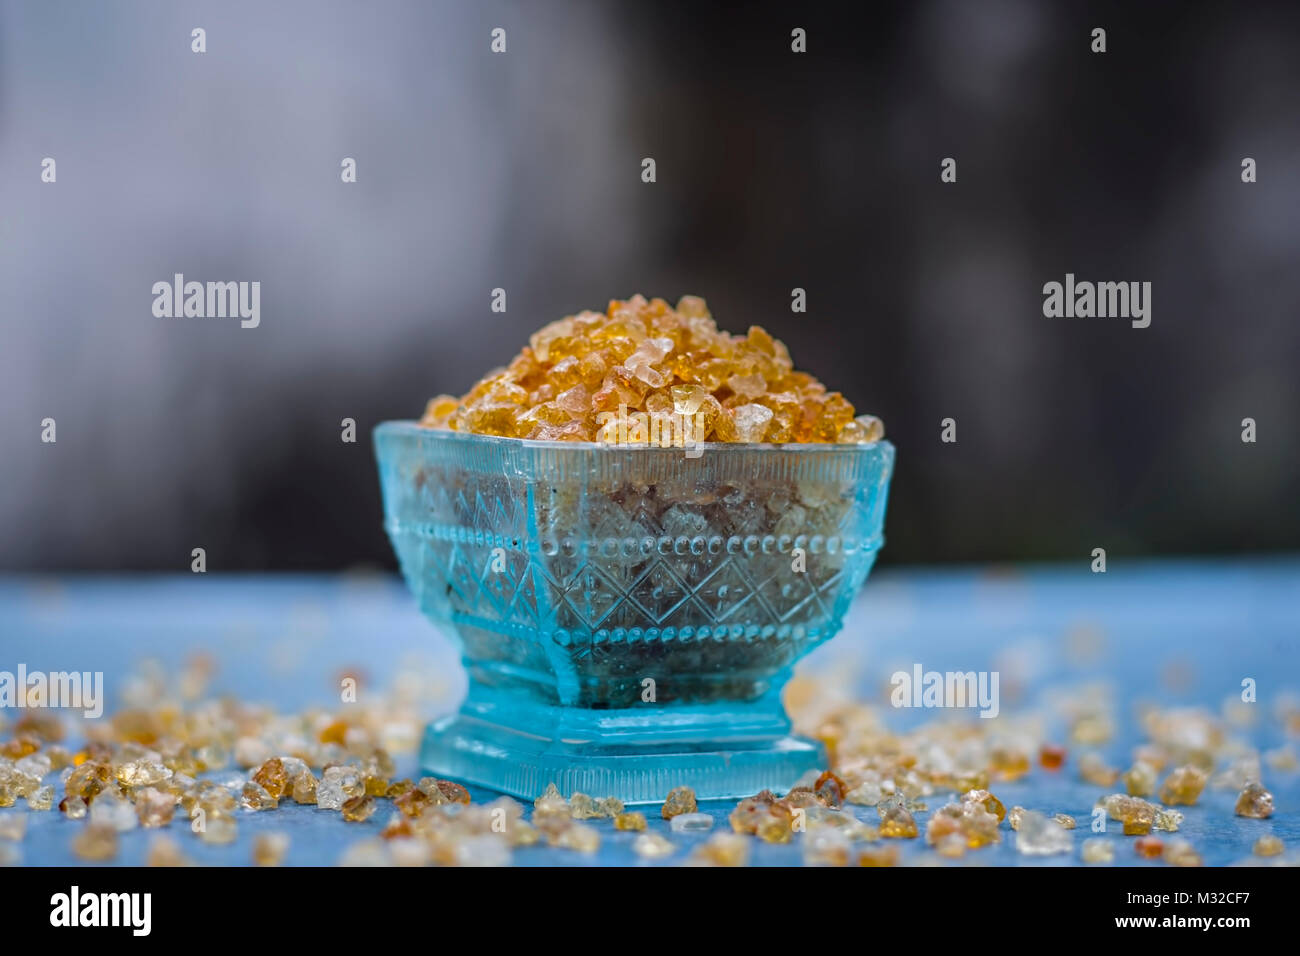 Close up of Edible gum,Gond,acacia gum in a blue colored bowl. Stock Photo